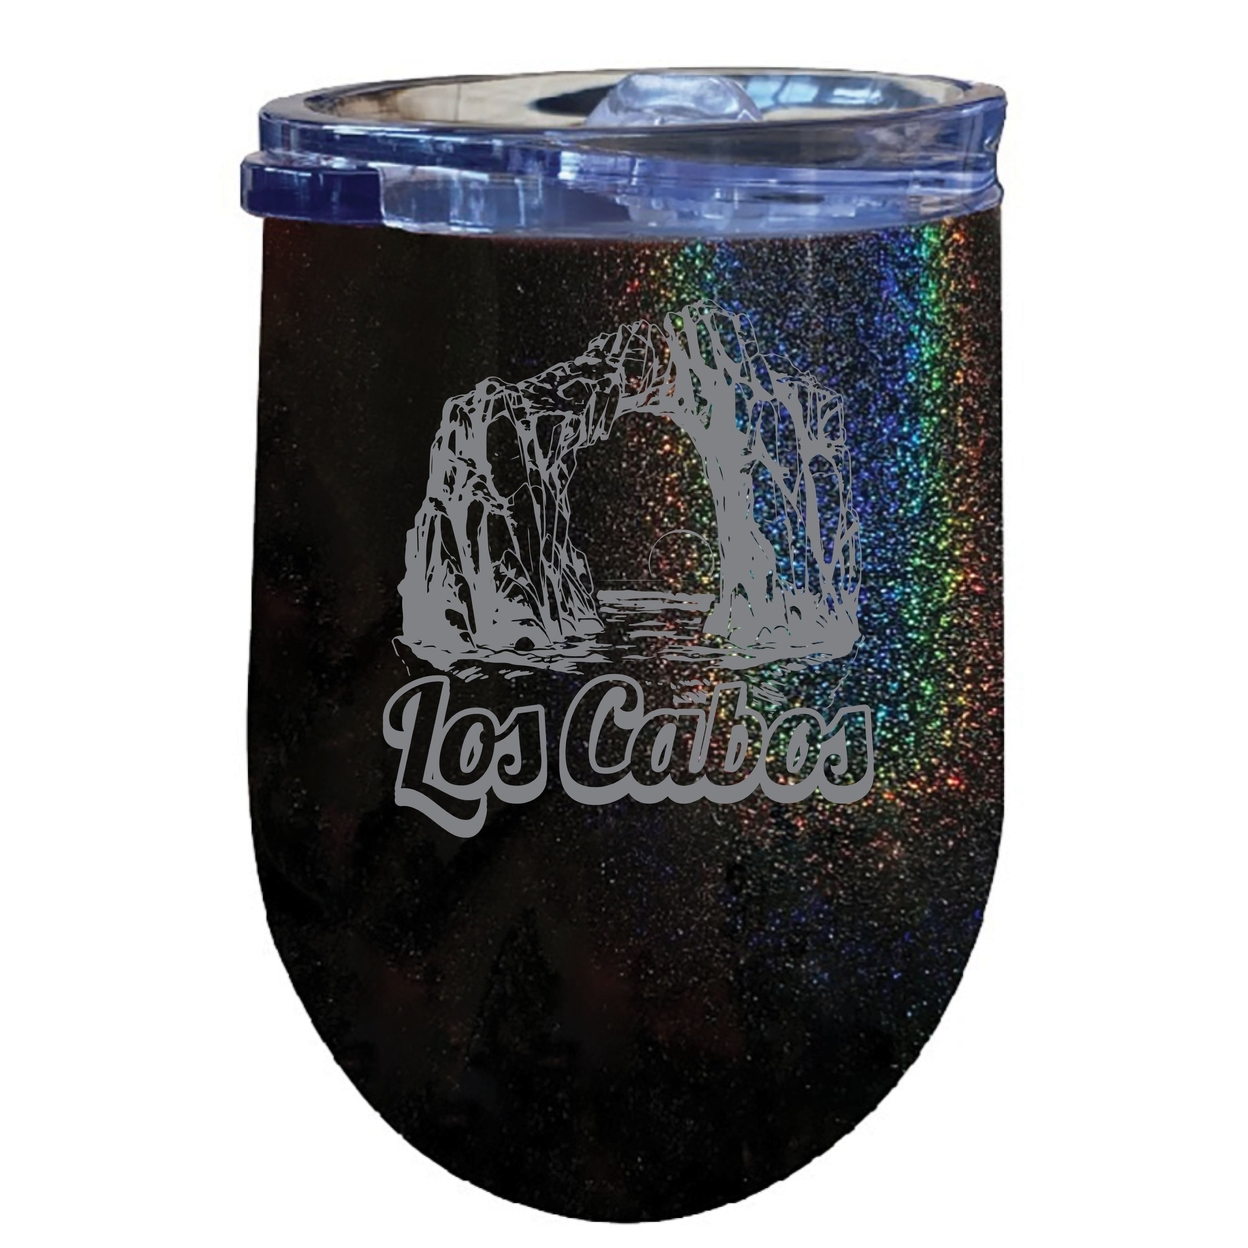 Los Cabos Mexico Souvenir 12 Oz Engraved Insulated Wine Stainless Steel Tumbler - Coral,,4-Pack